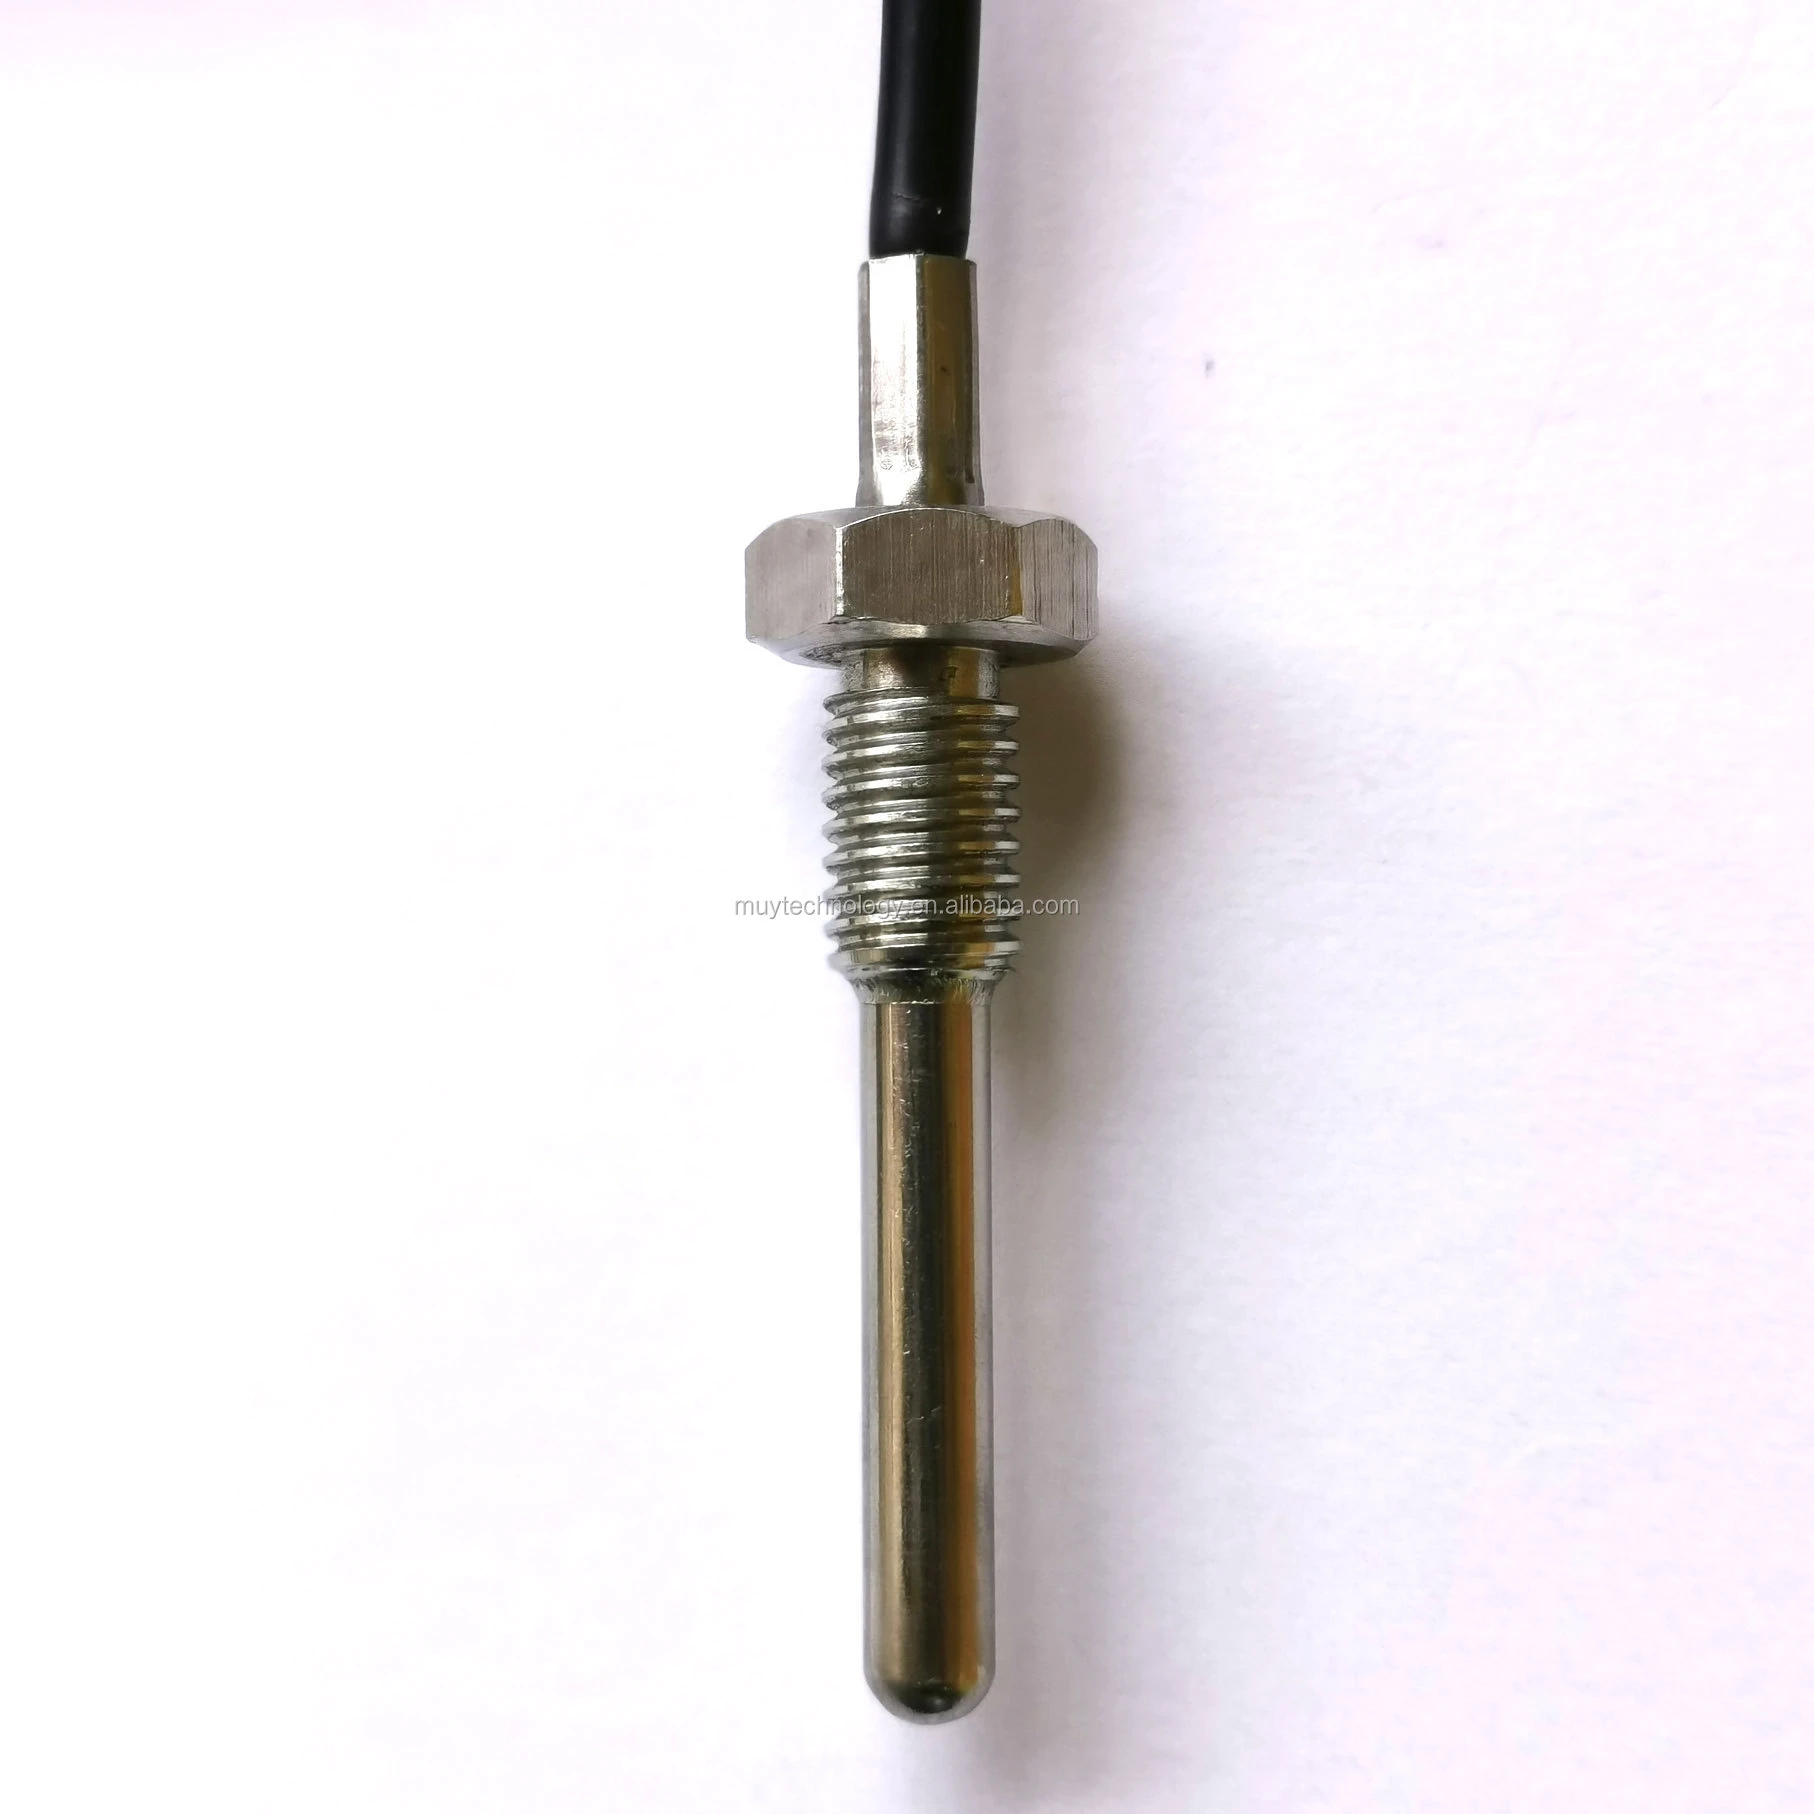 PT1000 class B RTD waterproof Temperature sensor 2 wire 3M siliconcable Stainless steel Tread